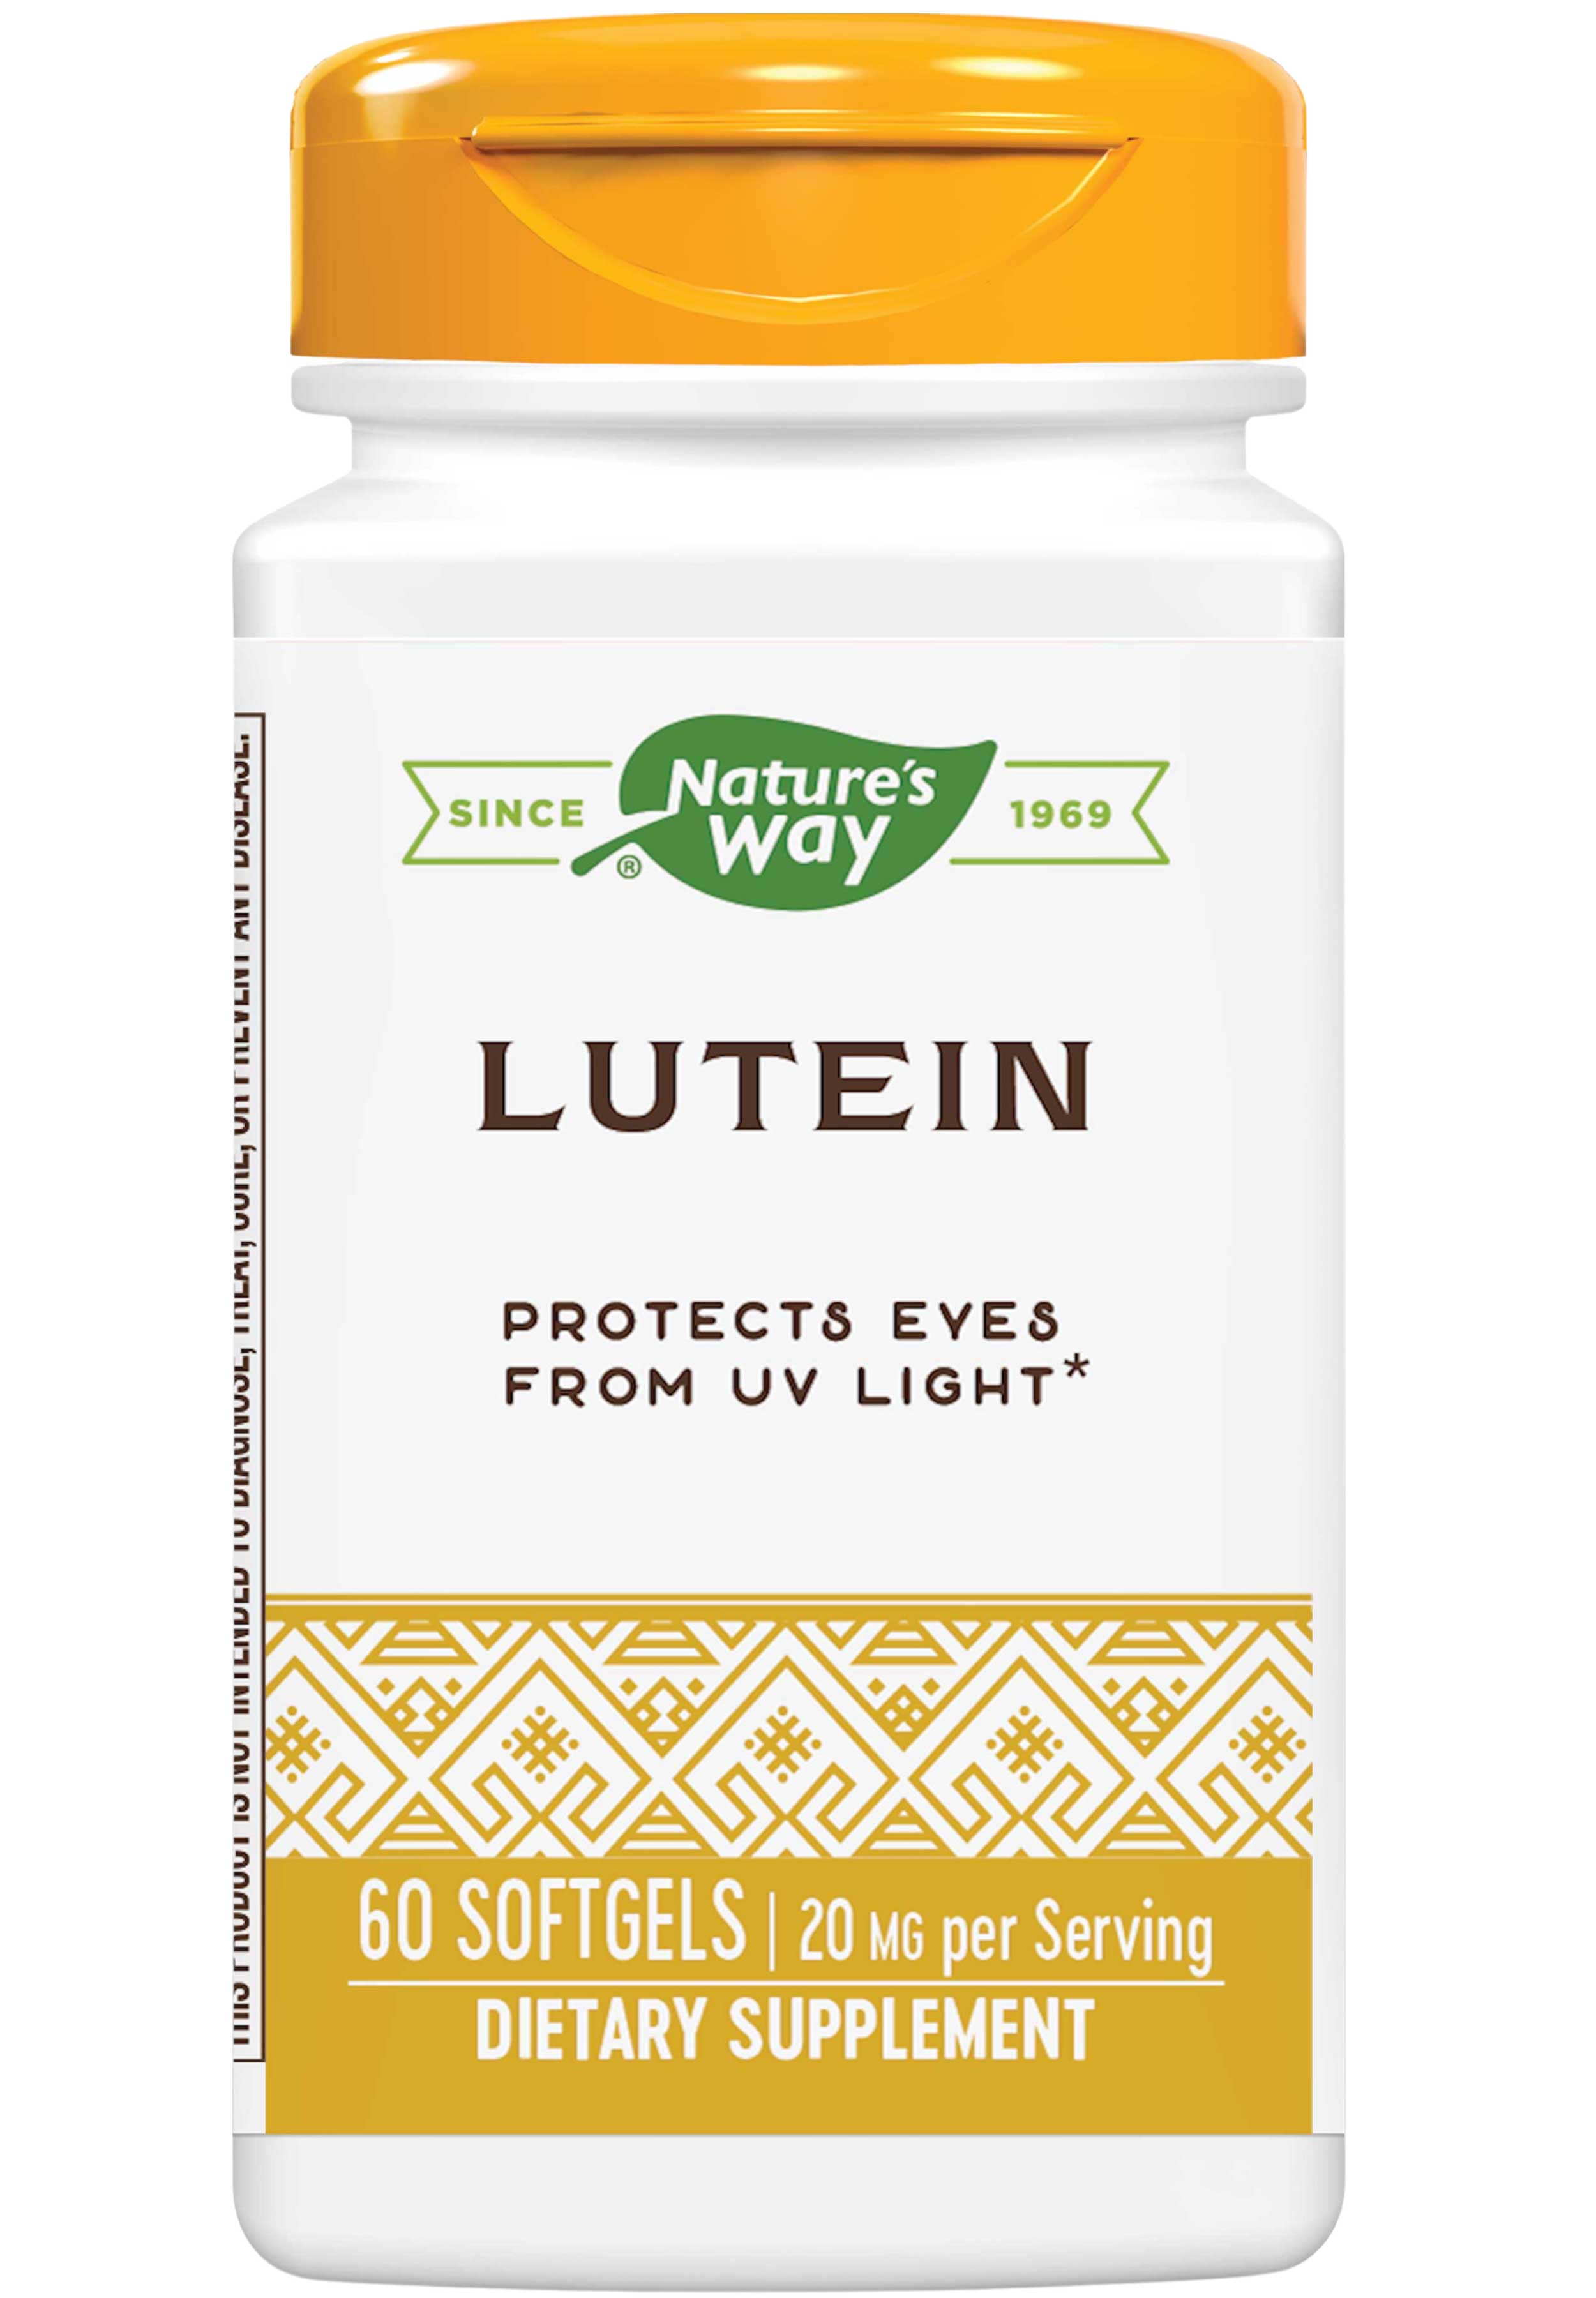 Nature's Way Lutein